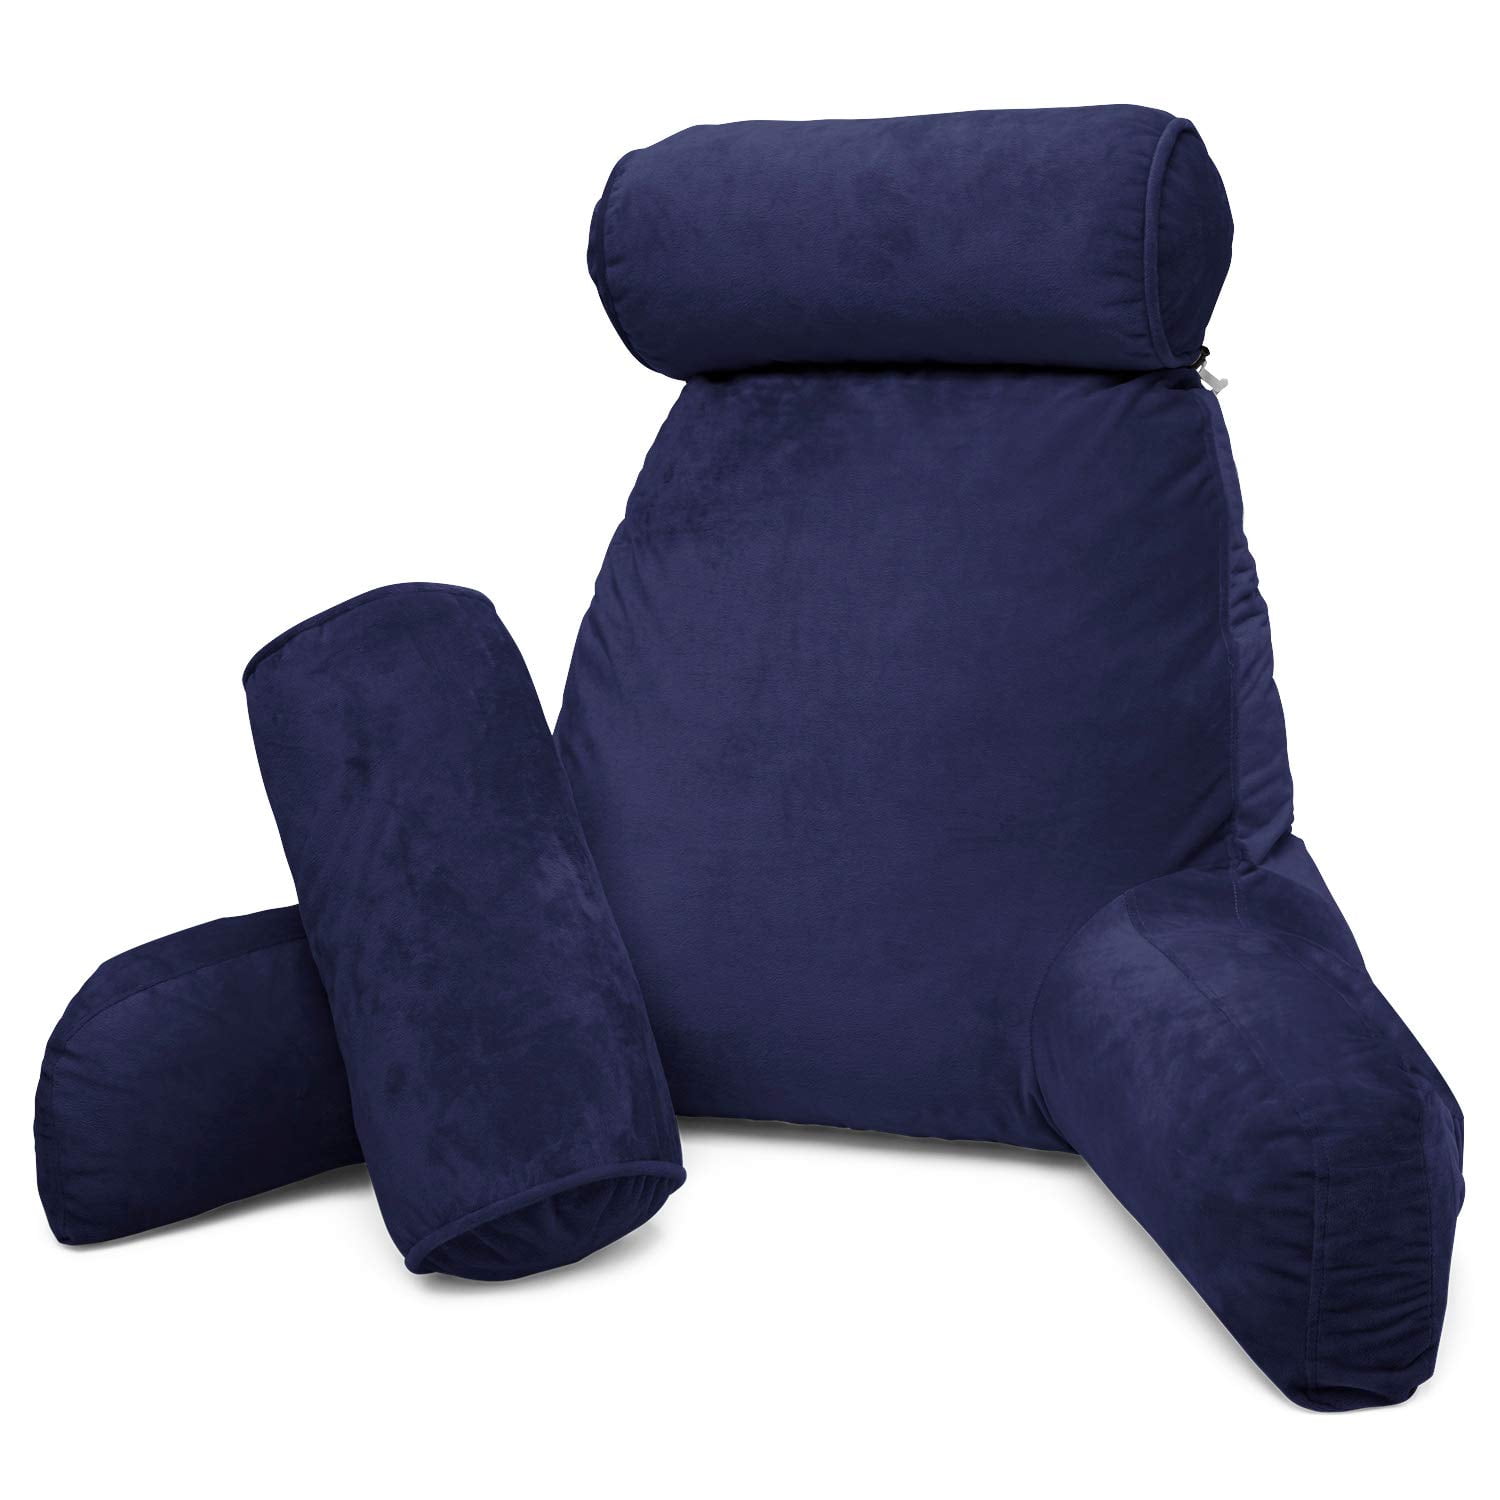 Lumbar Cushion Plush Backrest for Pregrant Woman Reading Pillow for Back Support While Sitting up in Bed Kids Teens & Adults- Premium Shredded Memory Foam Gaming Blue Watching TV